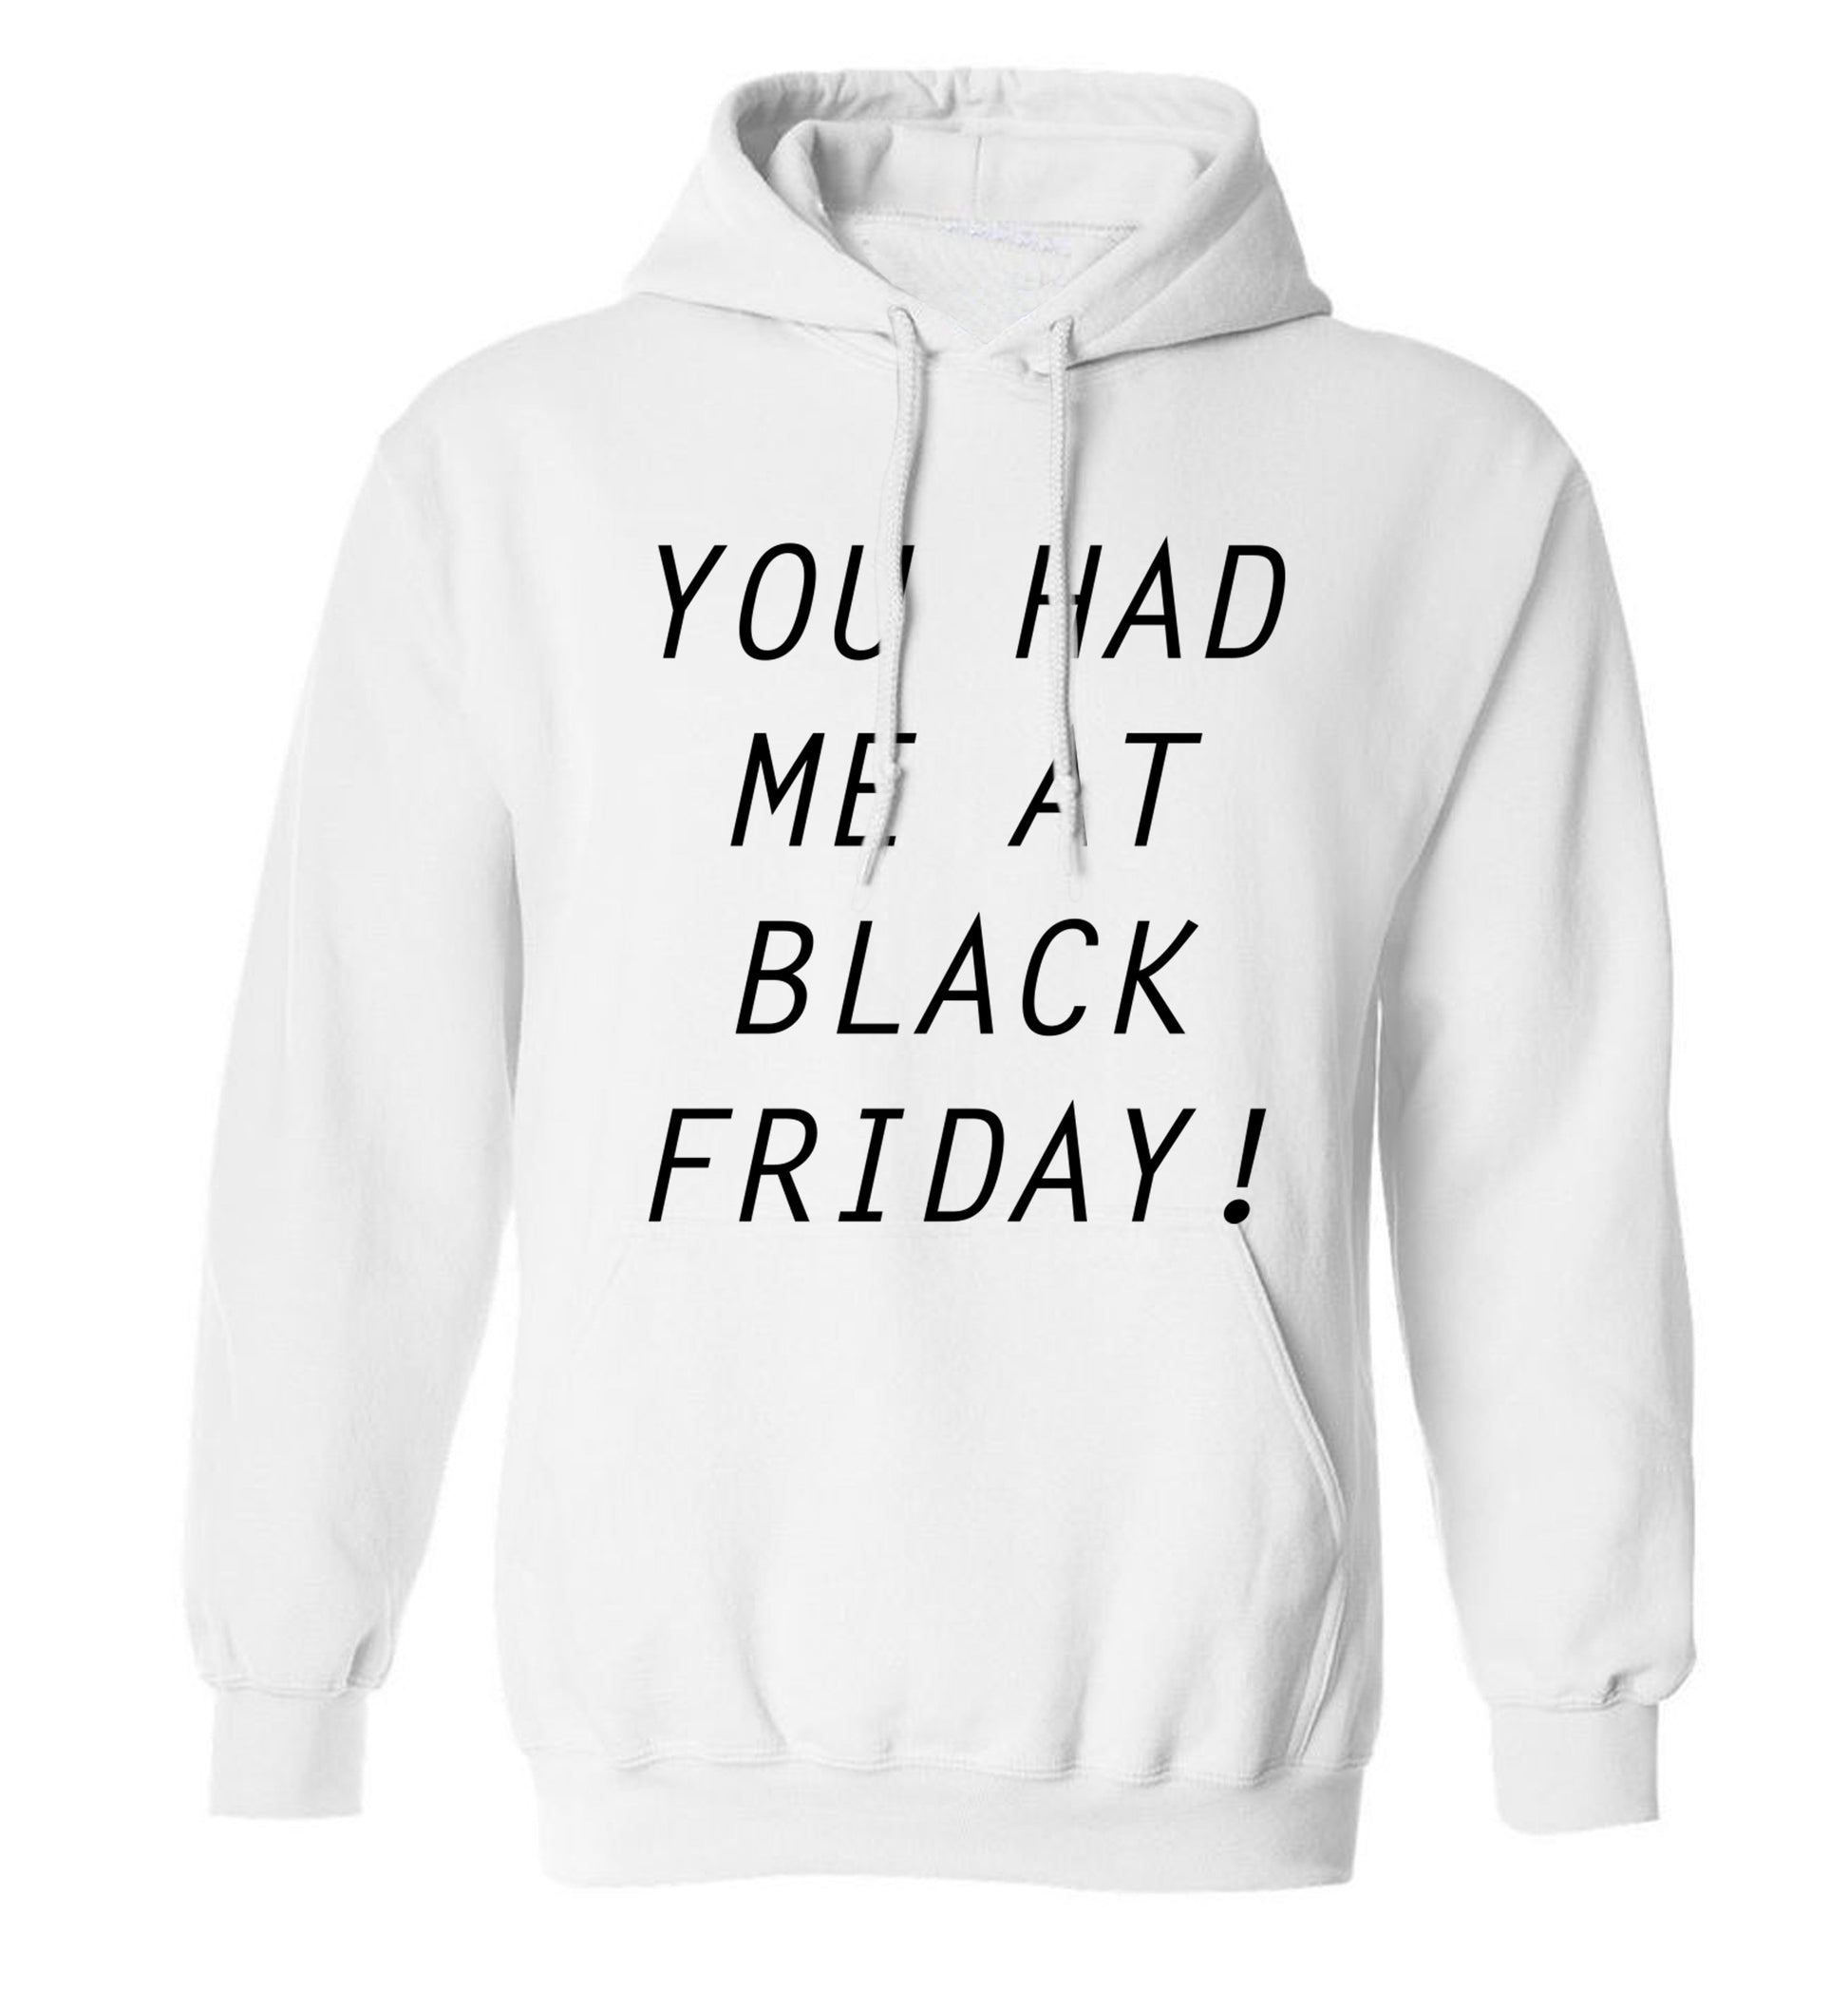 You had me at black friday adults unisex white hoodie 2XL